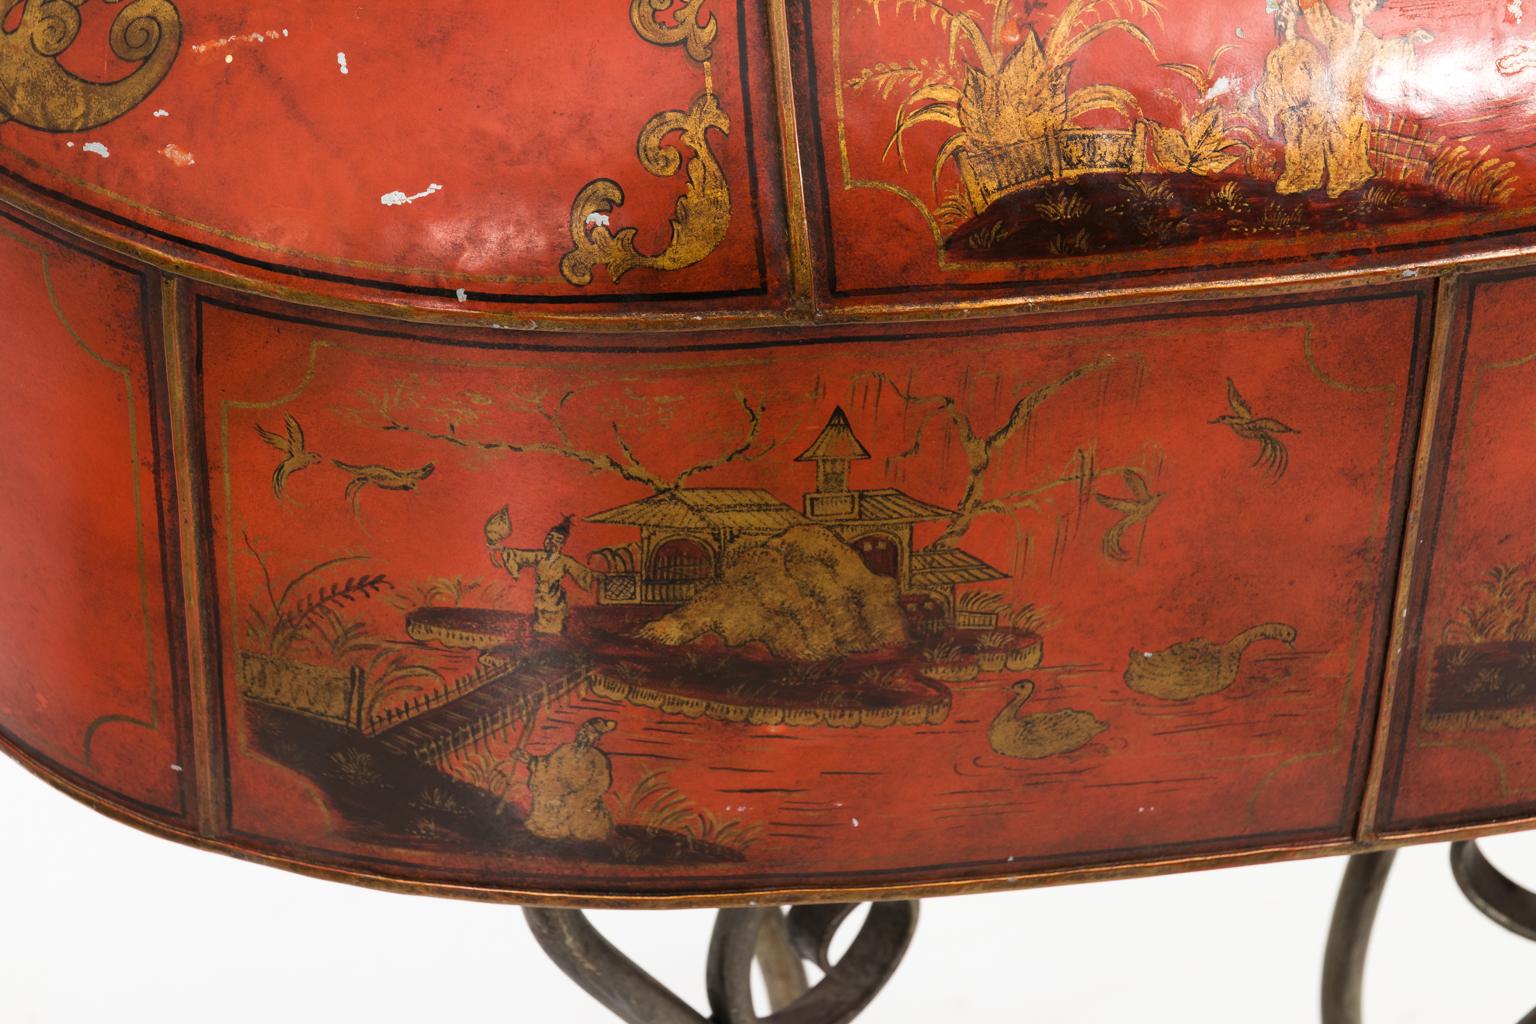 Red painted chinoiserie style metal planter with gold painted landscape scenes on scrolled base, circa early 20th century. Made in France. Please note that wear is consistent with age including surface chips on paint and hammered finish.